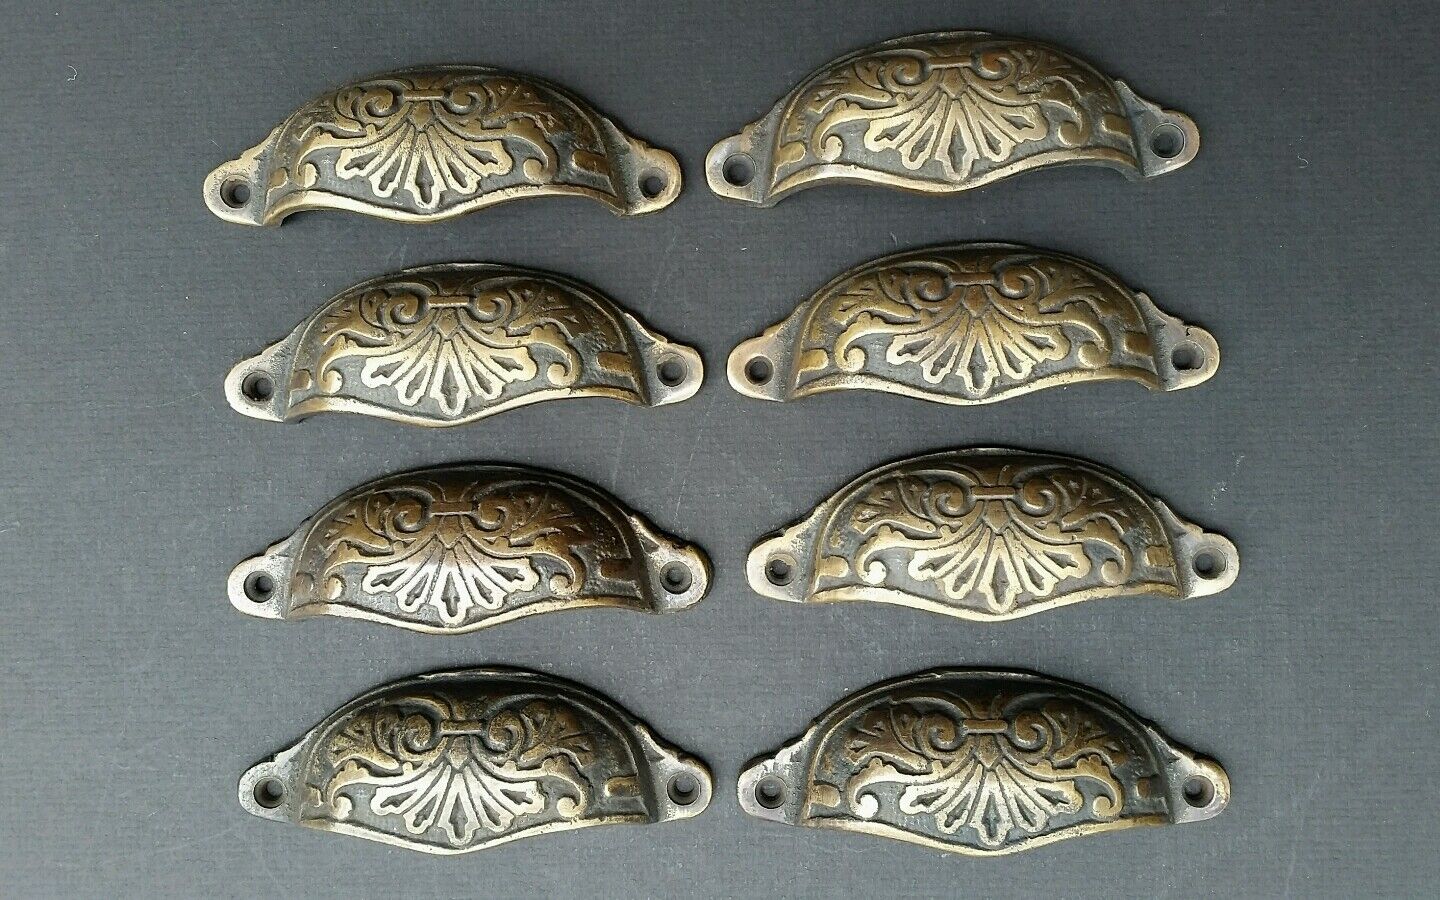 12 Apothecary Drawer Cup Bin Pull Handles 3-1/2"c. Antique Vict. Style Brass #A1